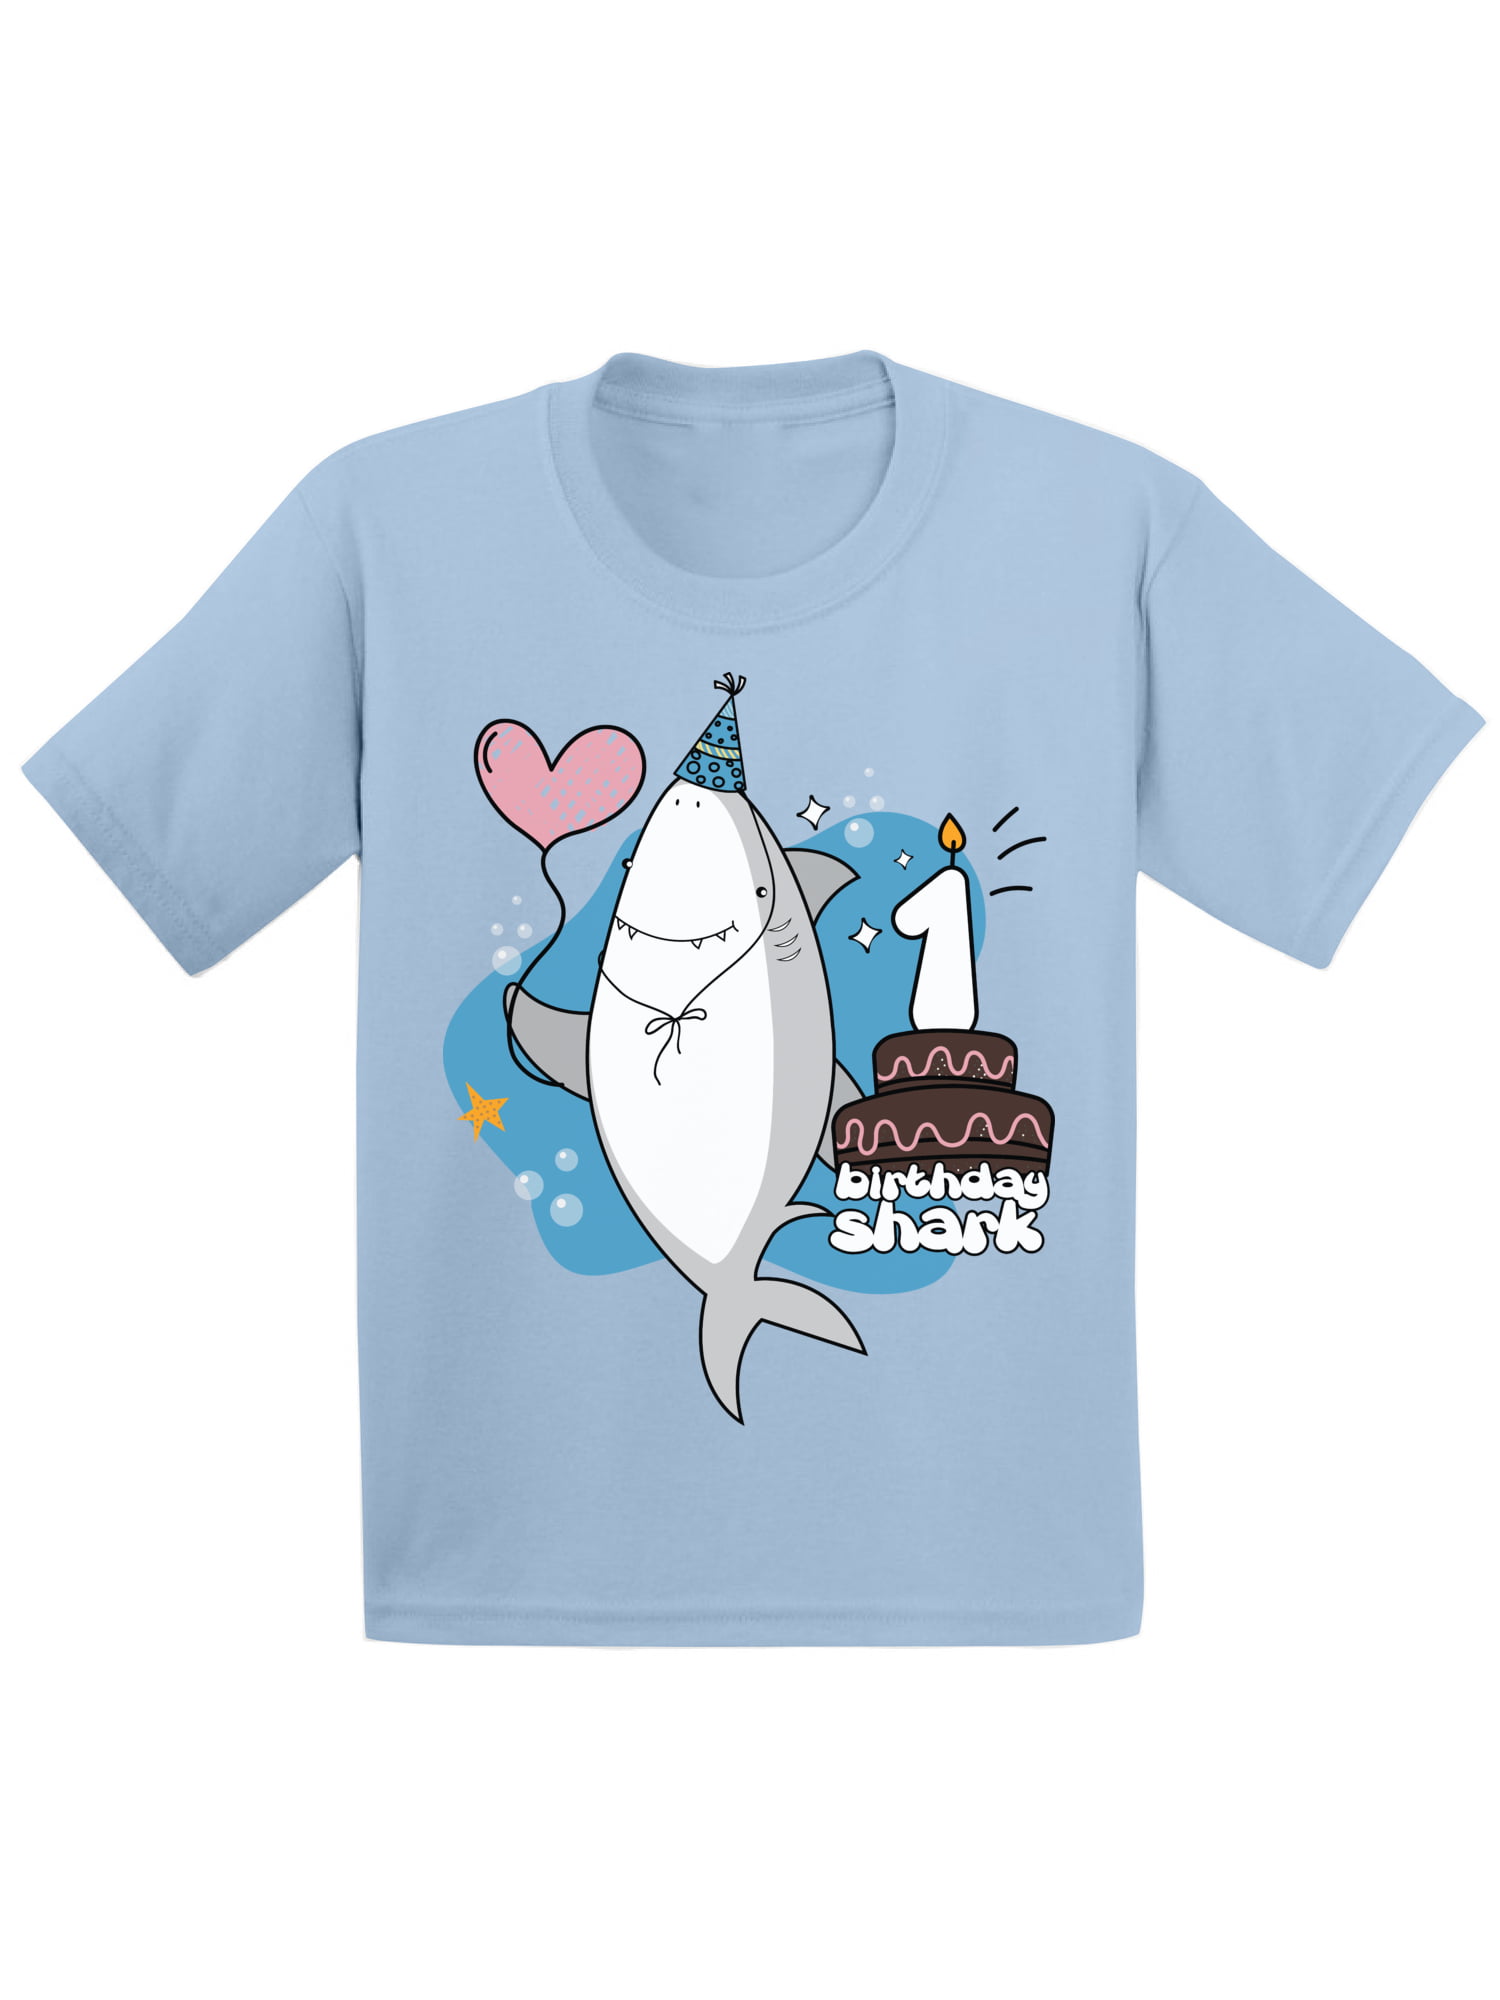 SHARK 4th Birthday Shirt SHARKS Personalize with Any Name Available in Youth and Toddler Sizes 4 Years Old